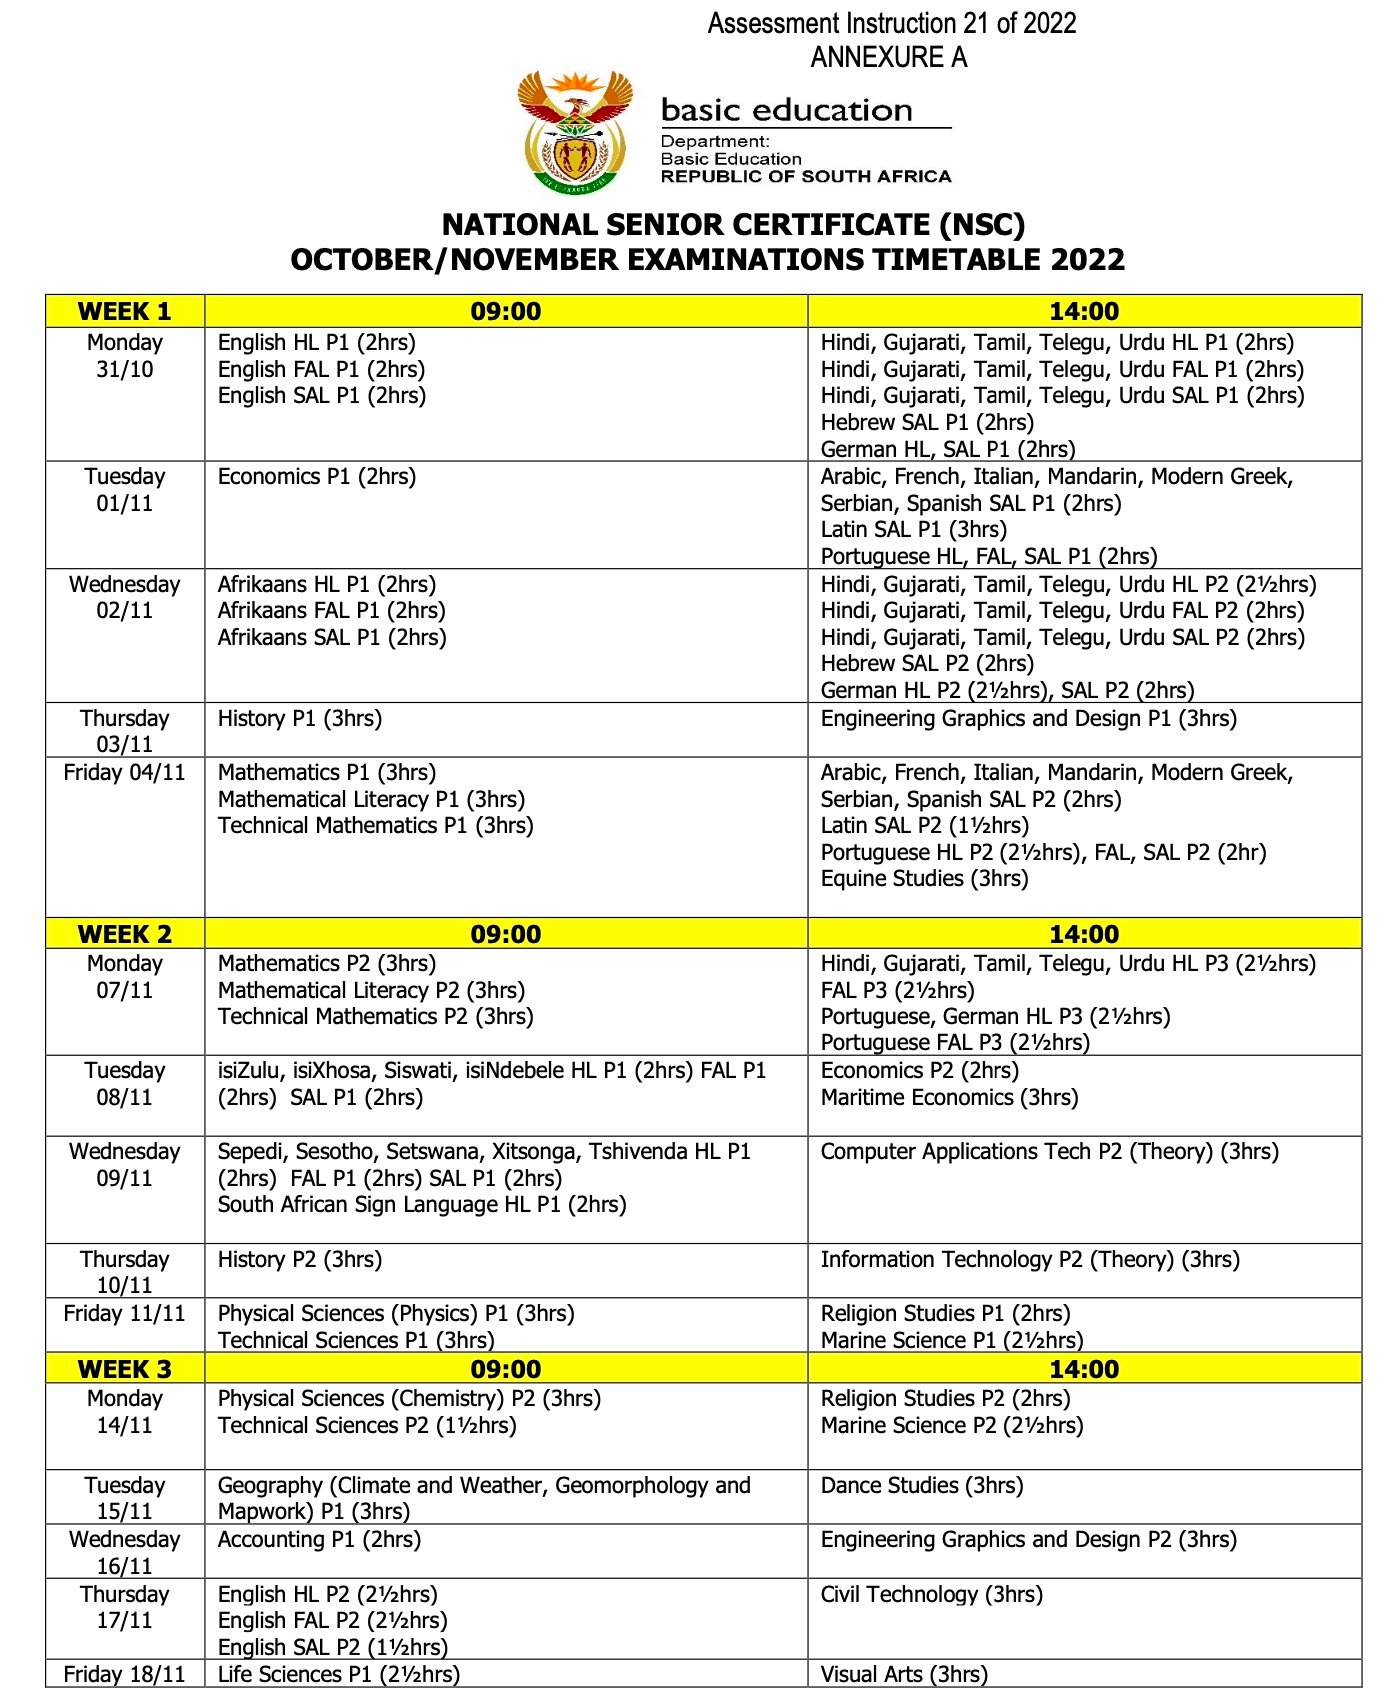 Grade 12 Matric Final Exam Timetable 2022 pdf October/November is out » My Courses